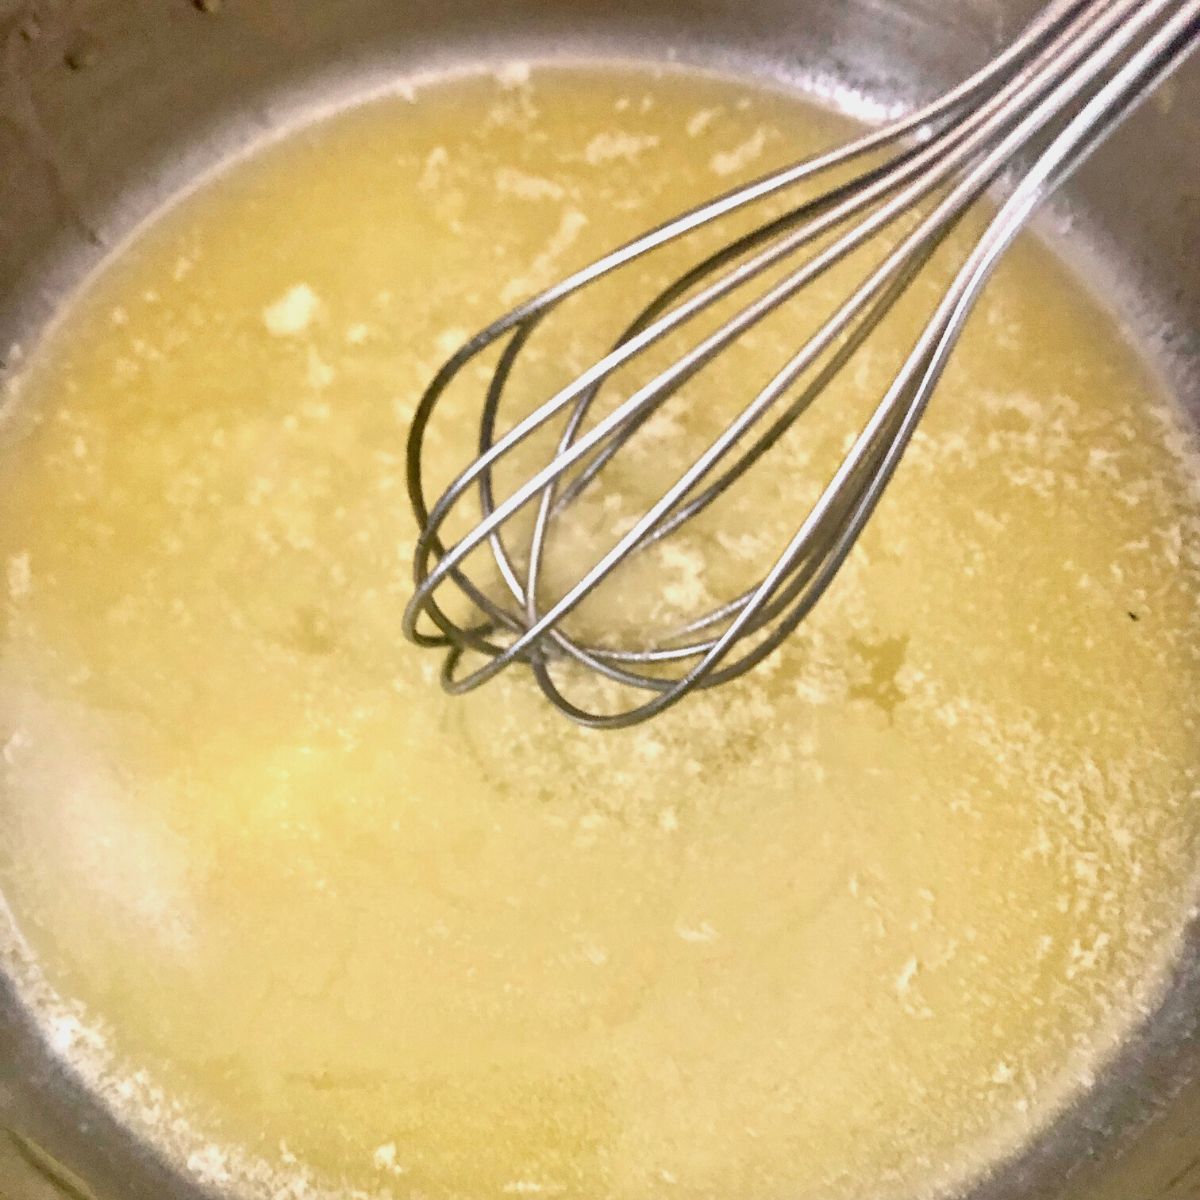 Melted butter in a saucepan with metal whisk